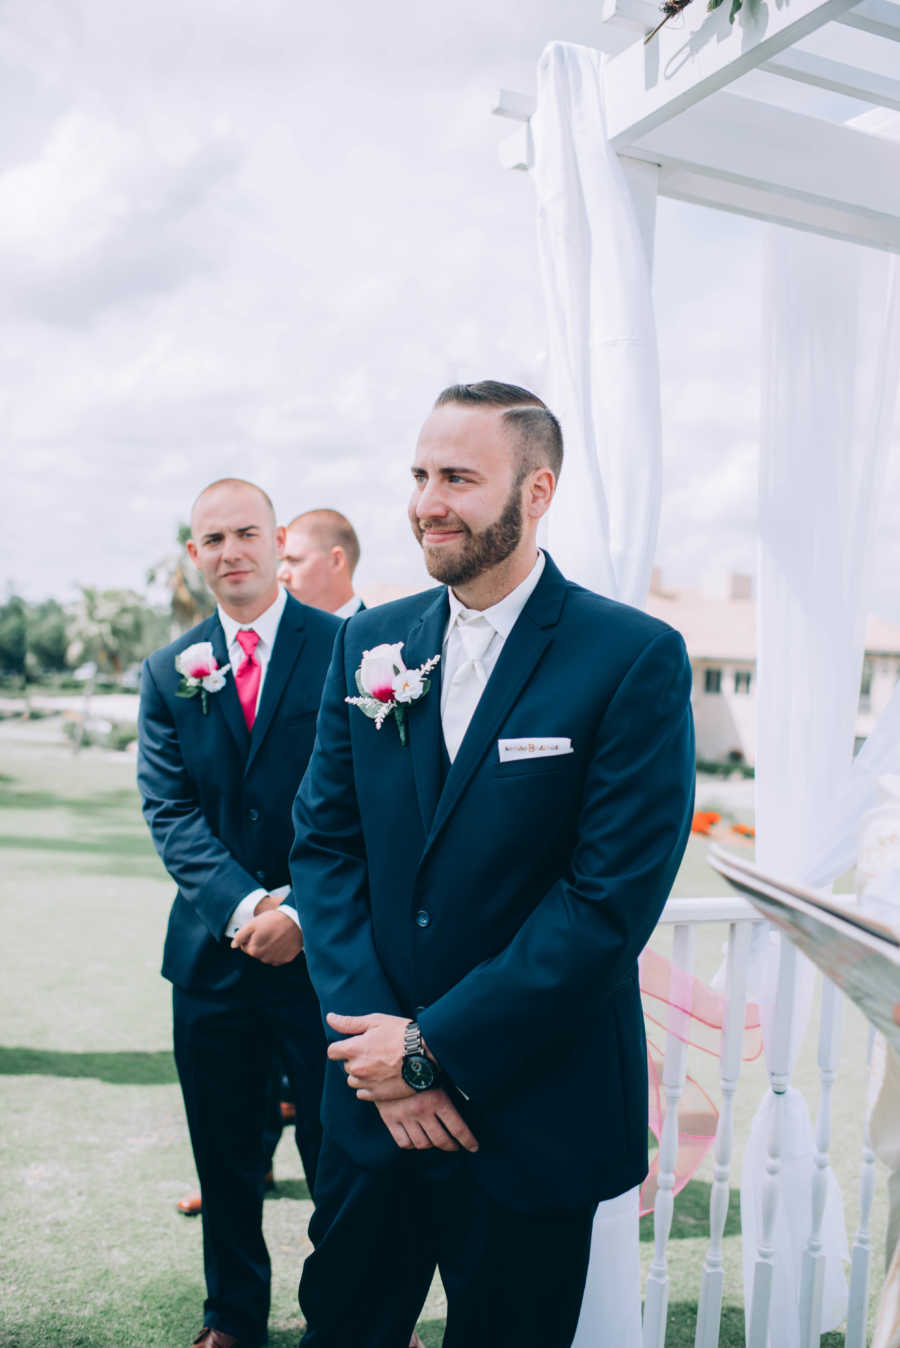 Groom smiles as he waits at altar of outdoor wedding